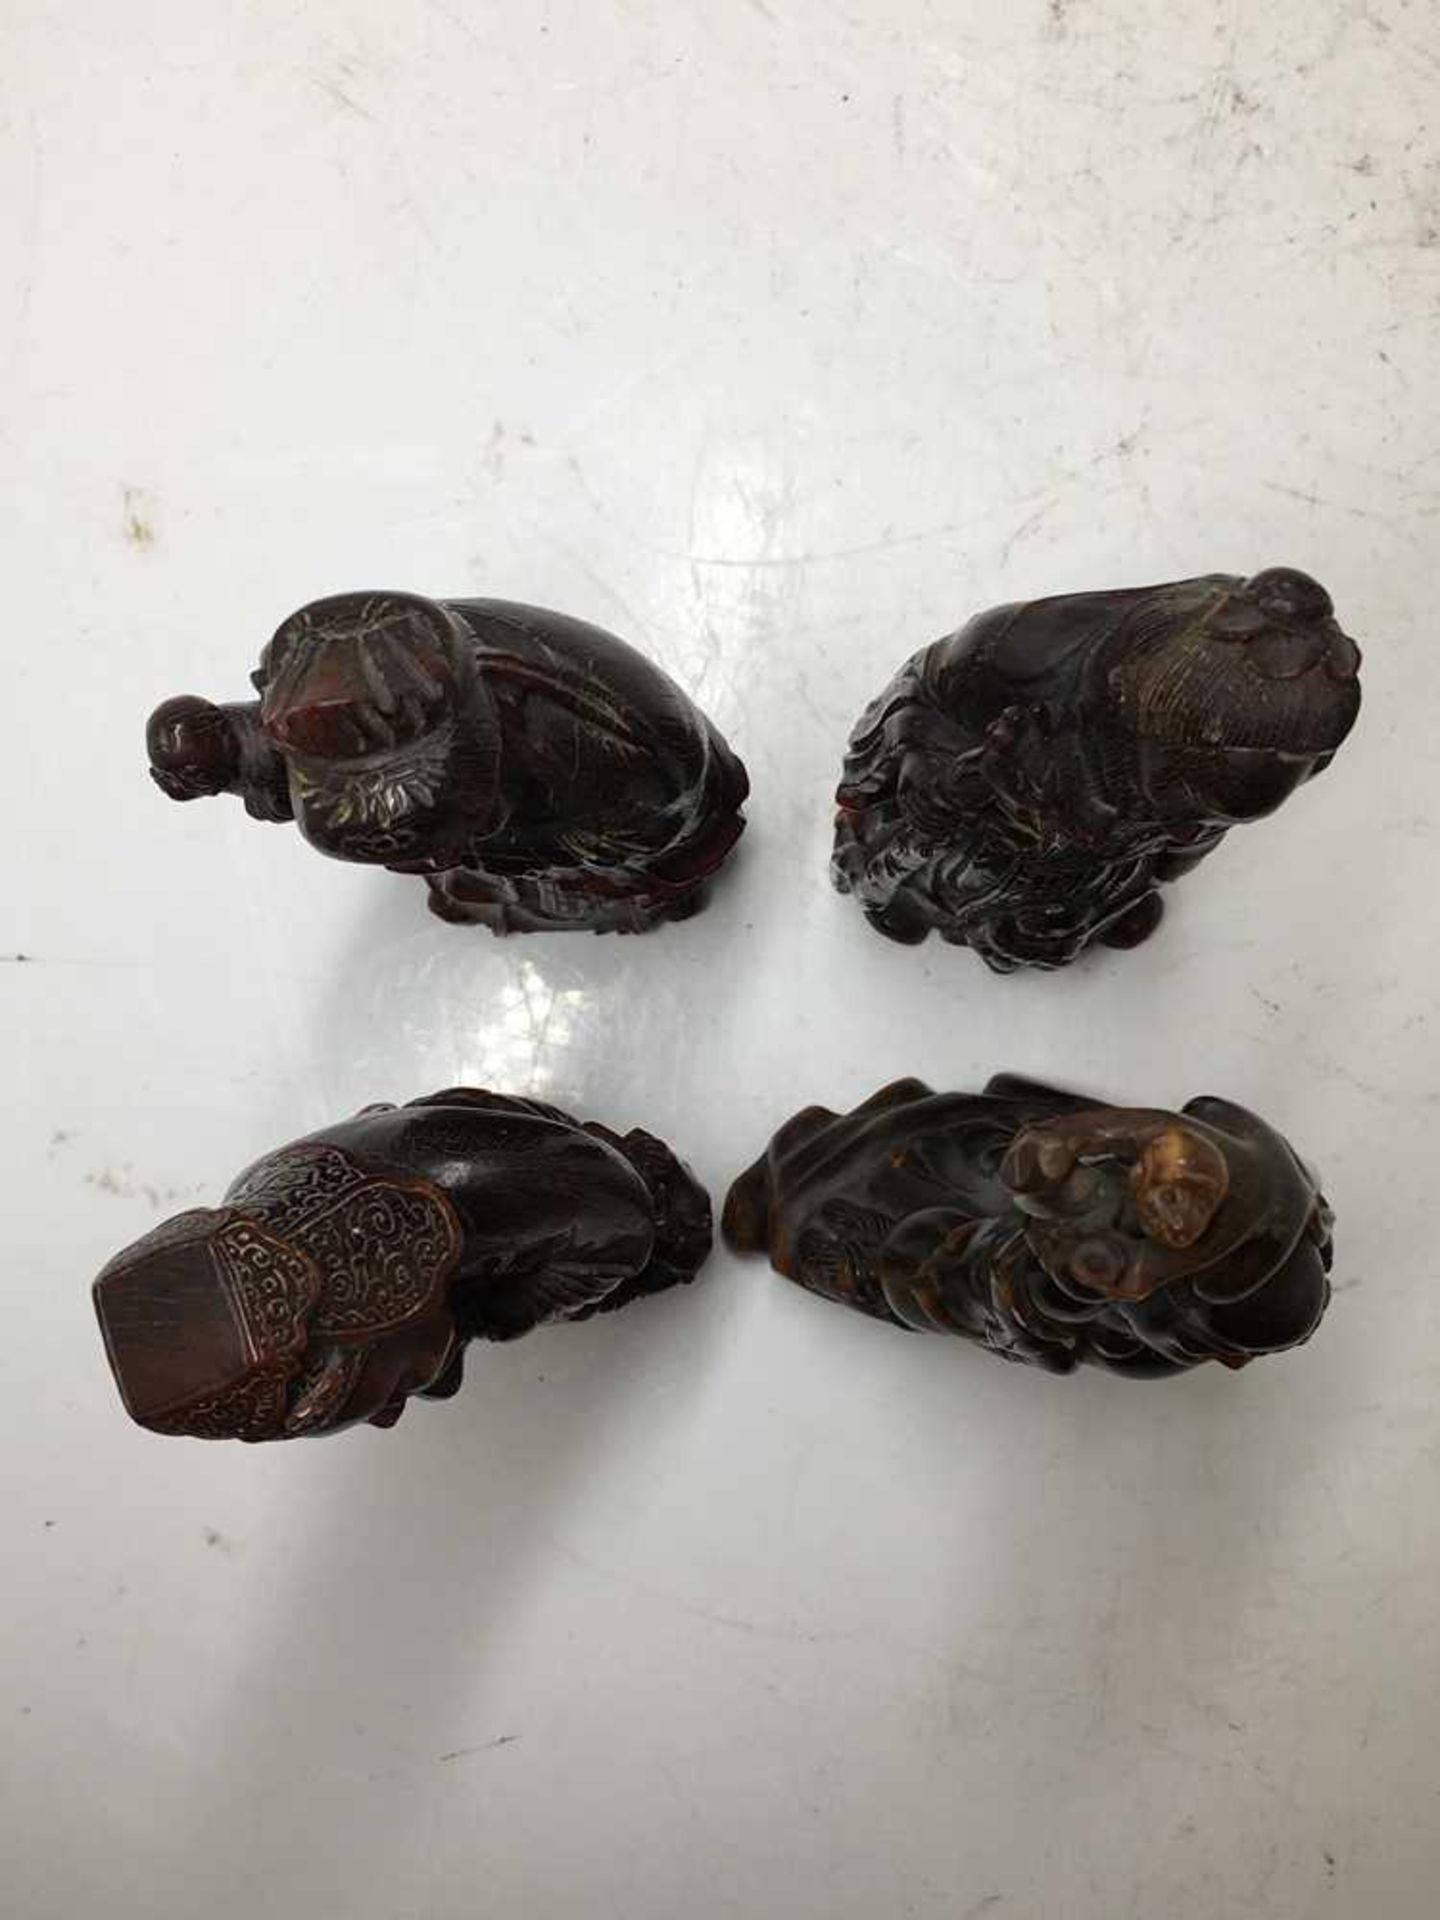 GROUP OF SIX CARVED BUFFALO HORN FIGURES 19TH-20TH CENTURY - Image 24 of 26